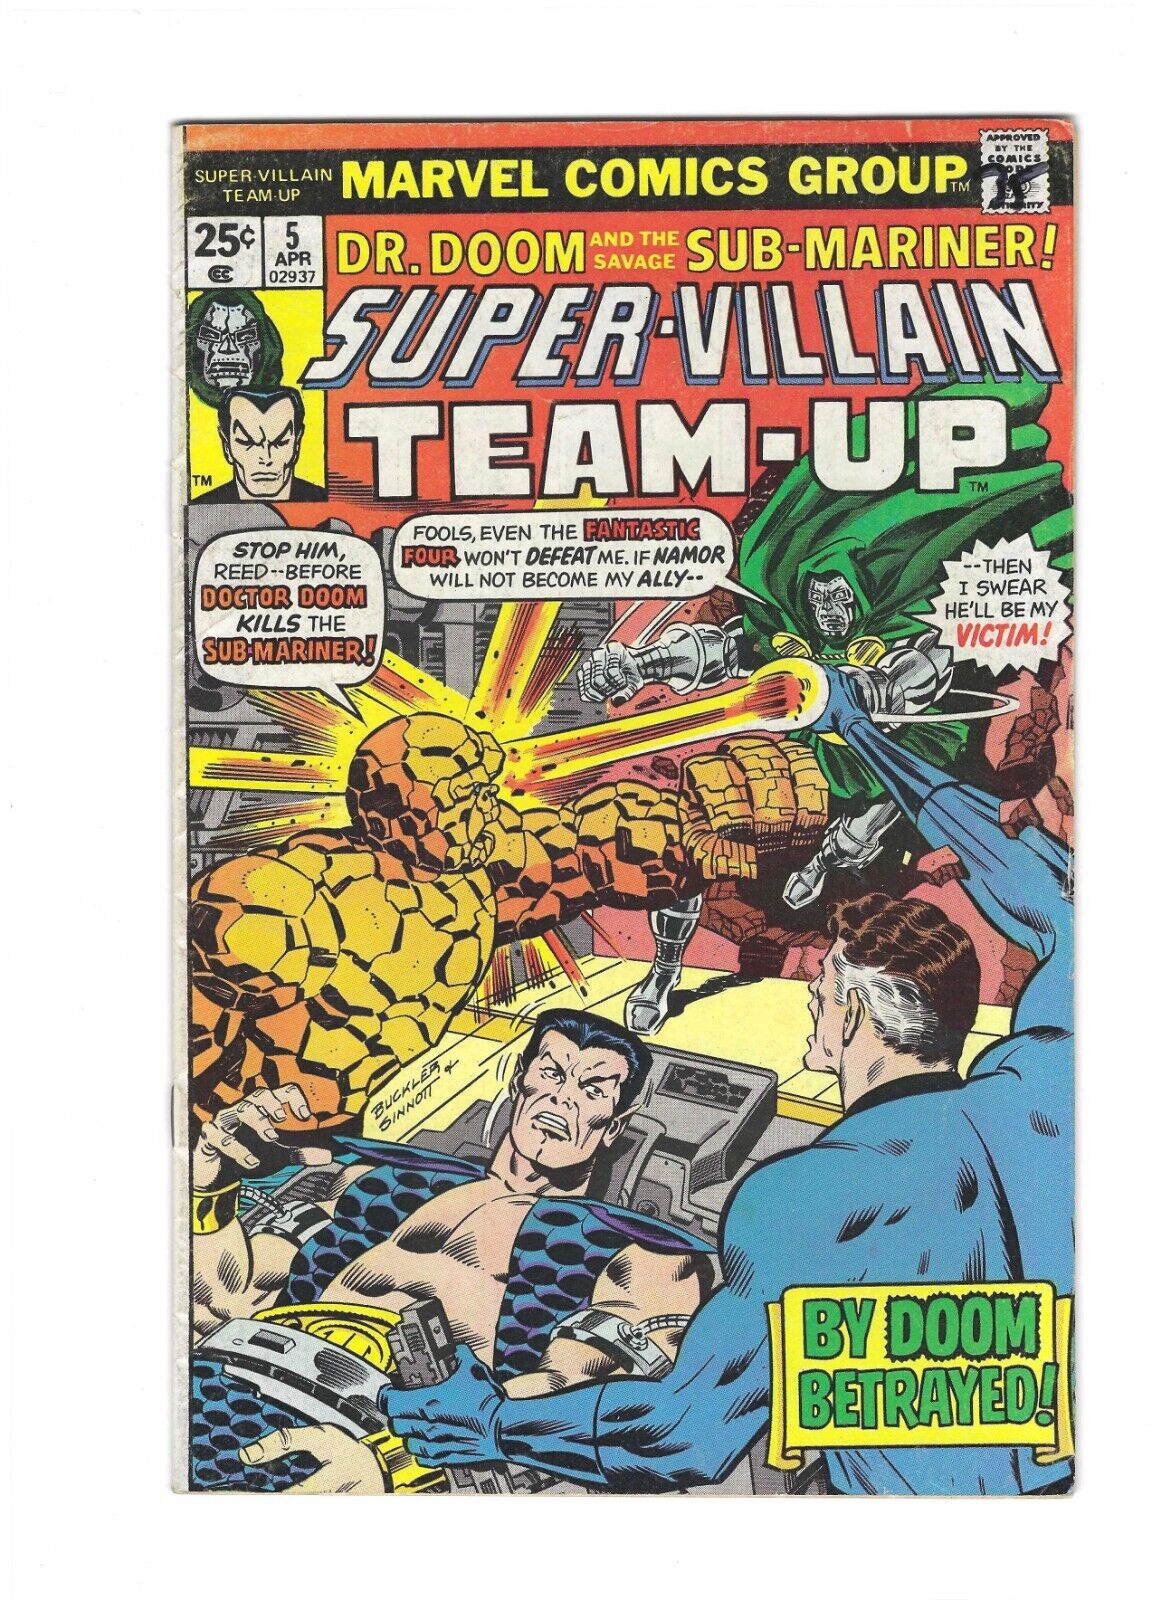 Super-Villain Team-Up #5: Dry Cleaned: Pressed: Bagged: Boarded FN-VF 7.0